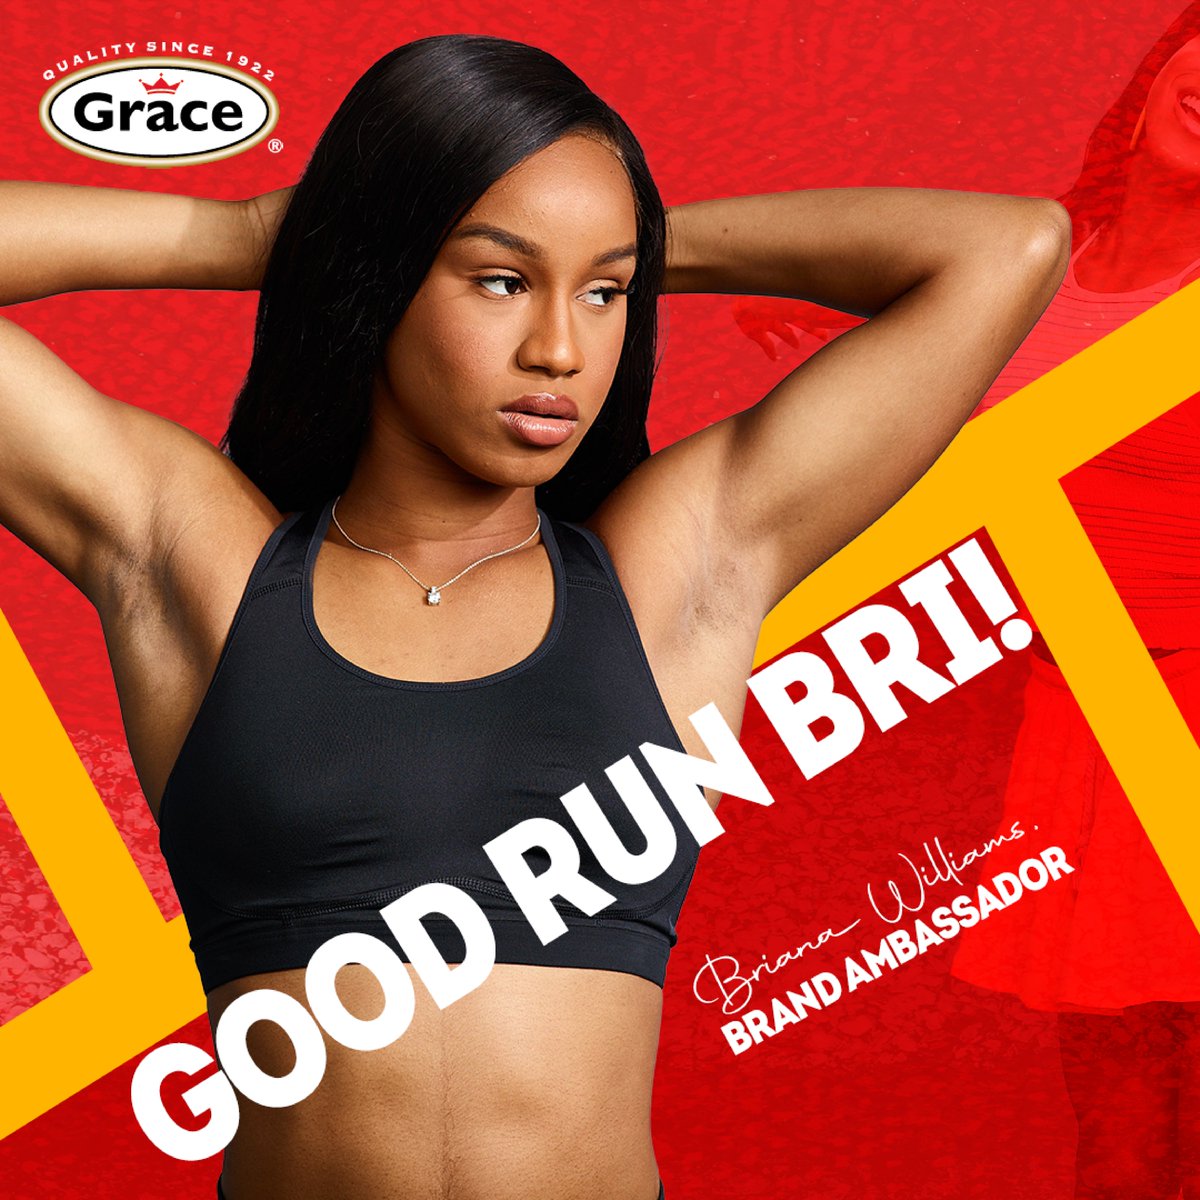 We're always proud every time you touch the track! Keep at em Bri! #BrandAmbassador #GraceFoods